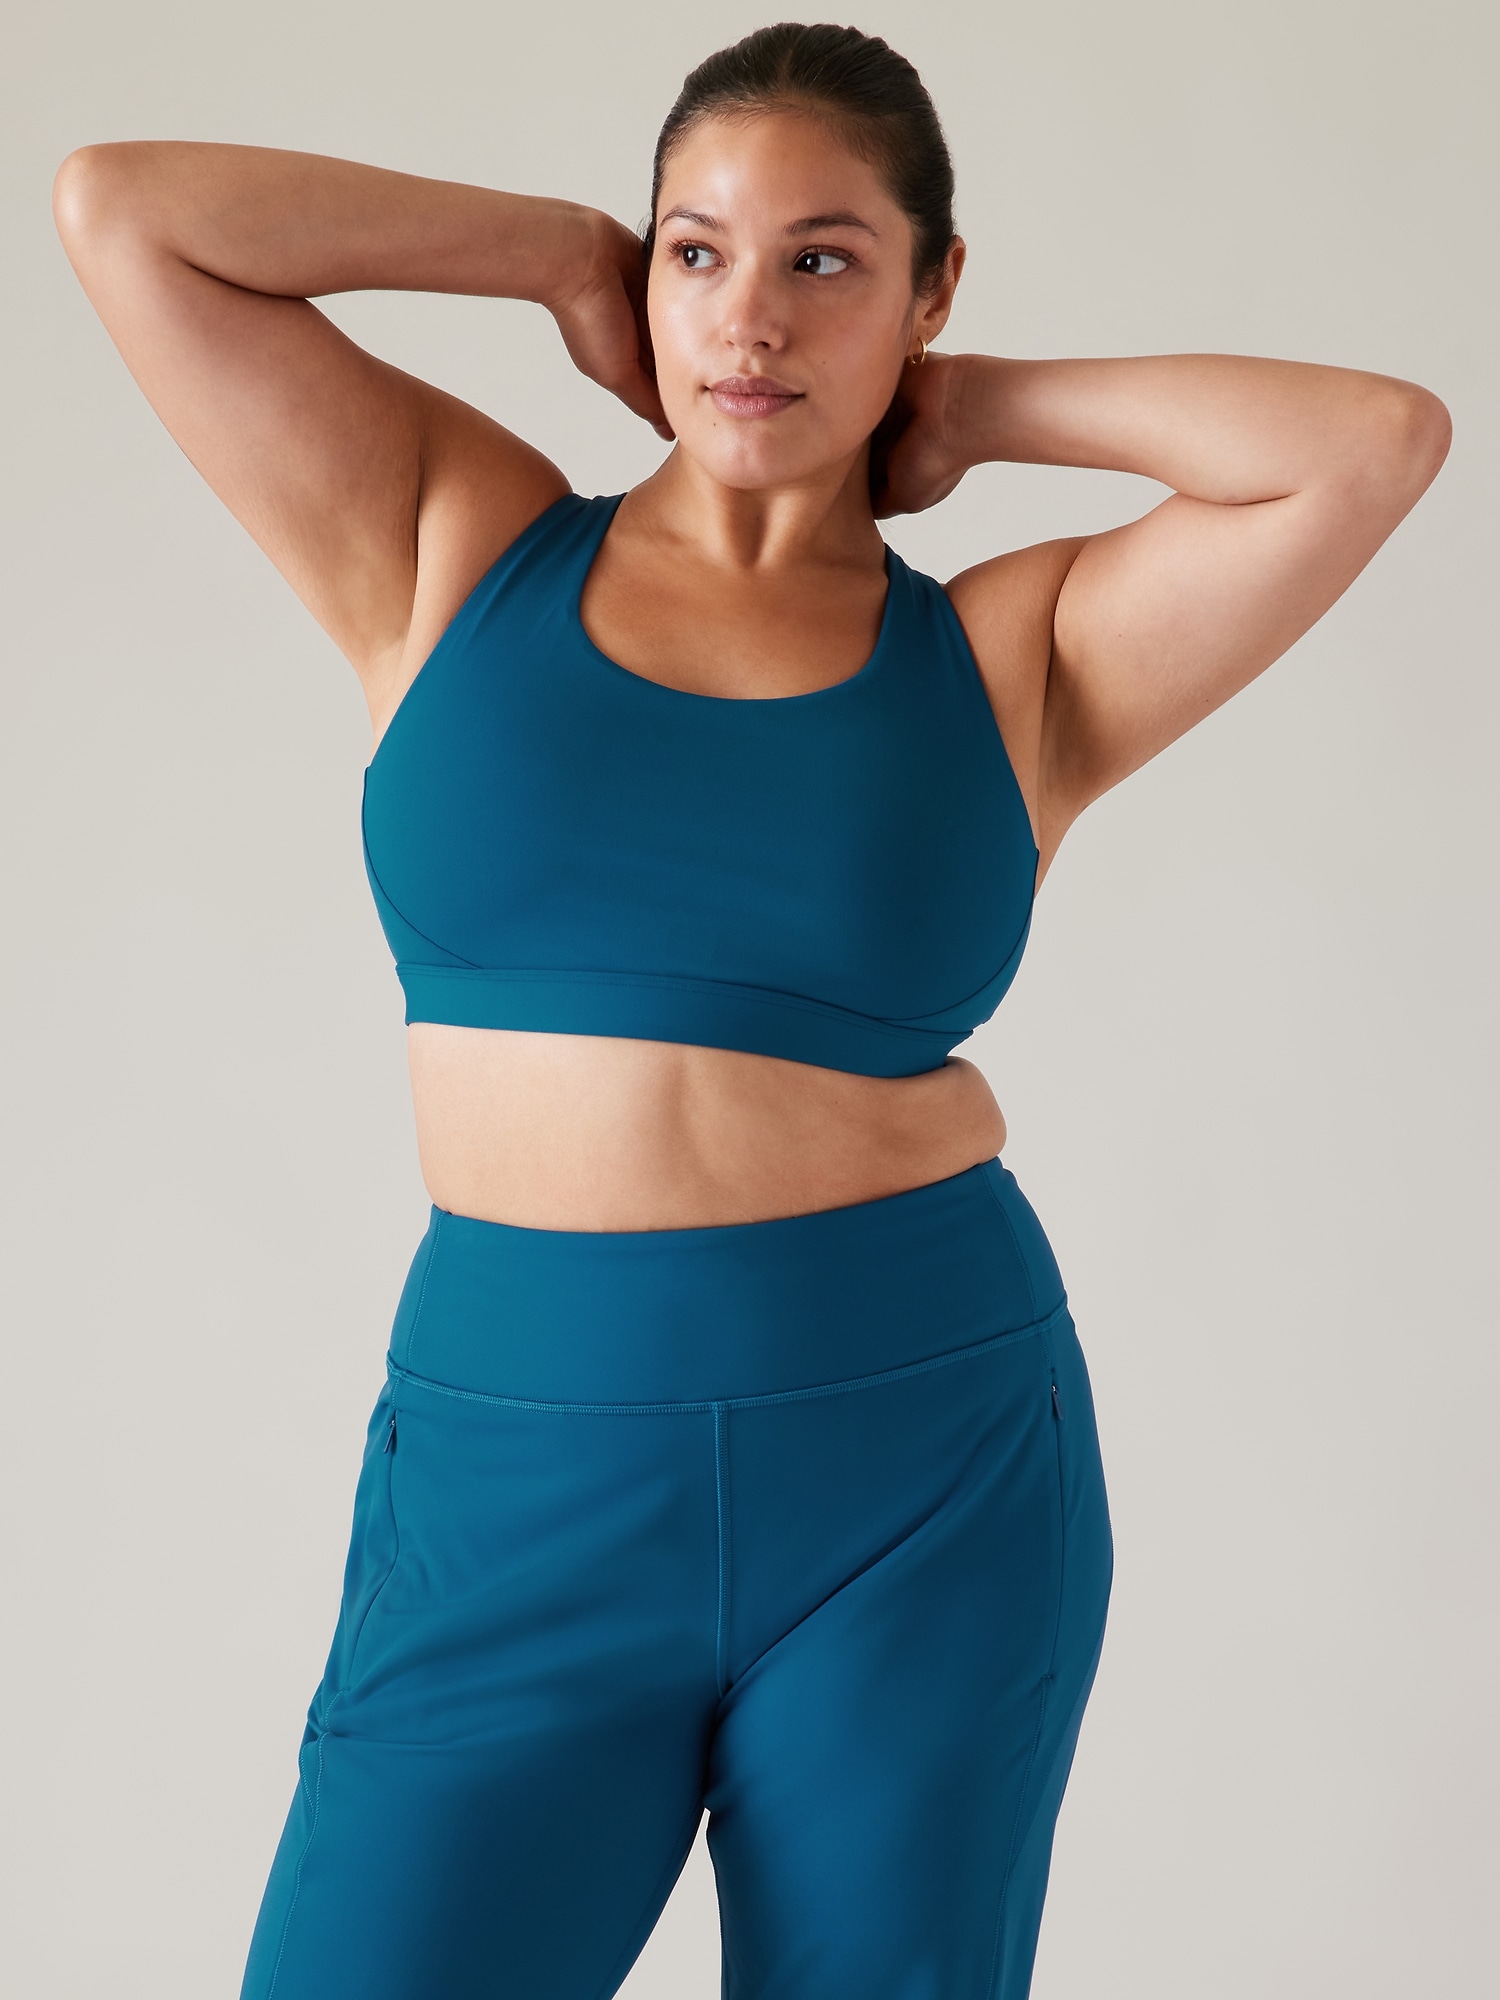 310 Zyia activewear ideas  active wear, active wear outfits, how to wear